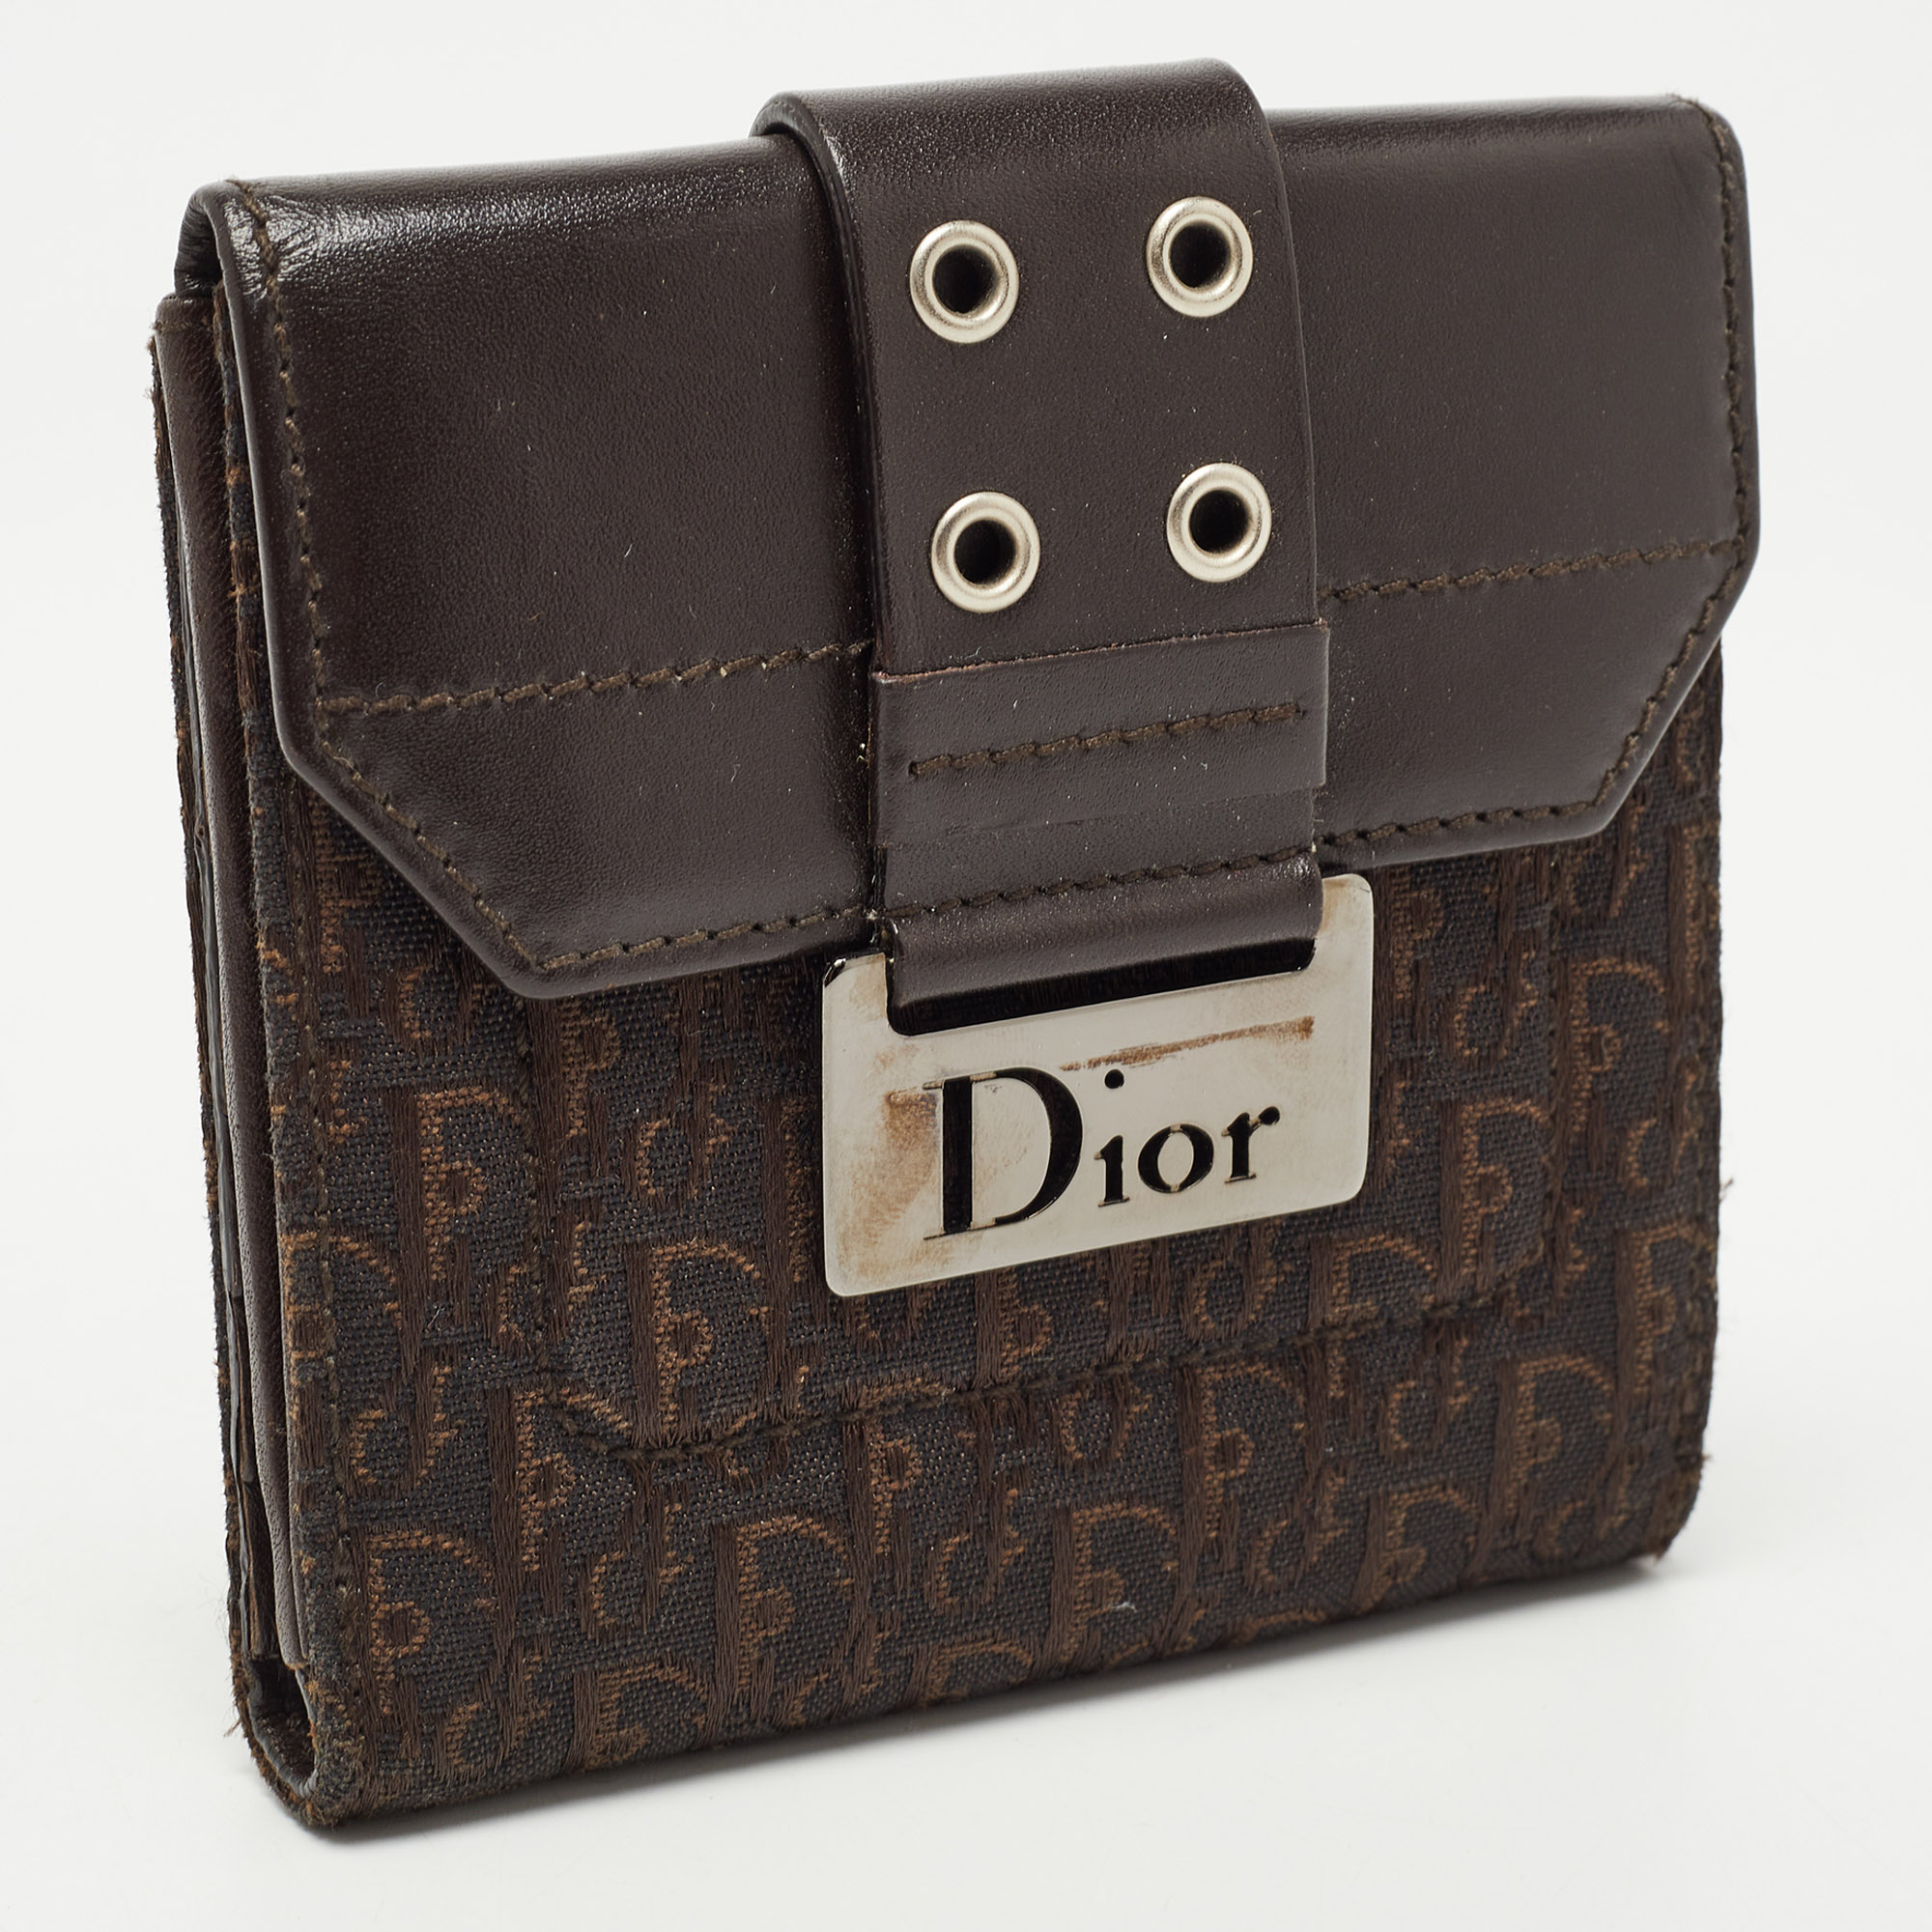 Dior Dark Brown Oblique Canvas And Leather Street Chic Compact Wallet